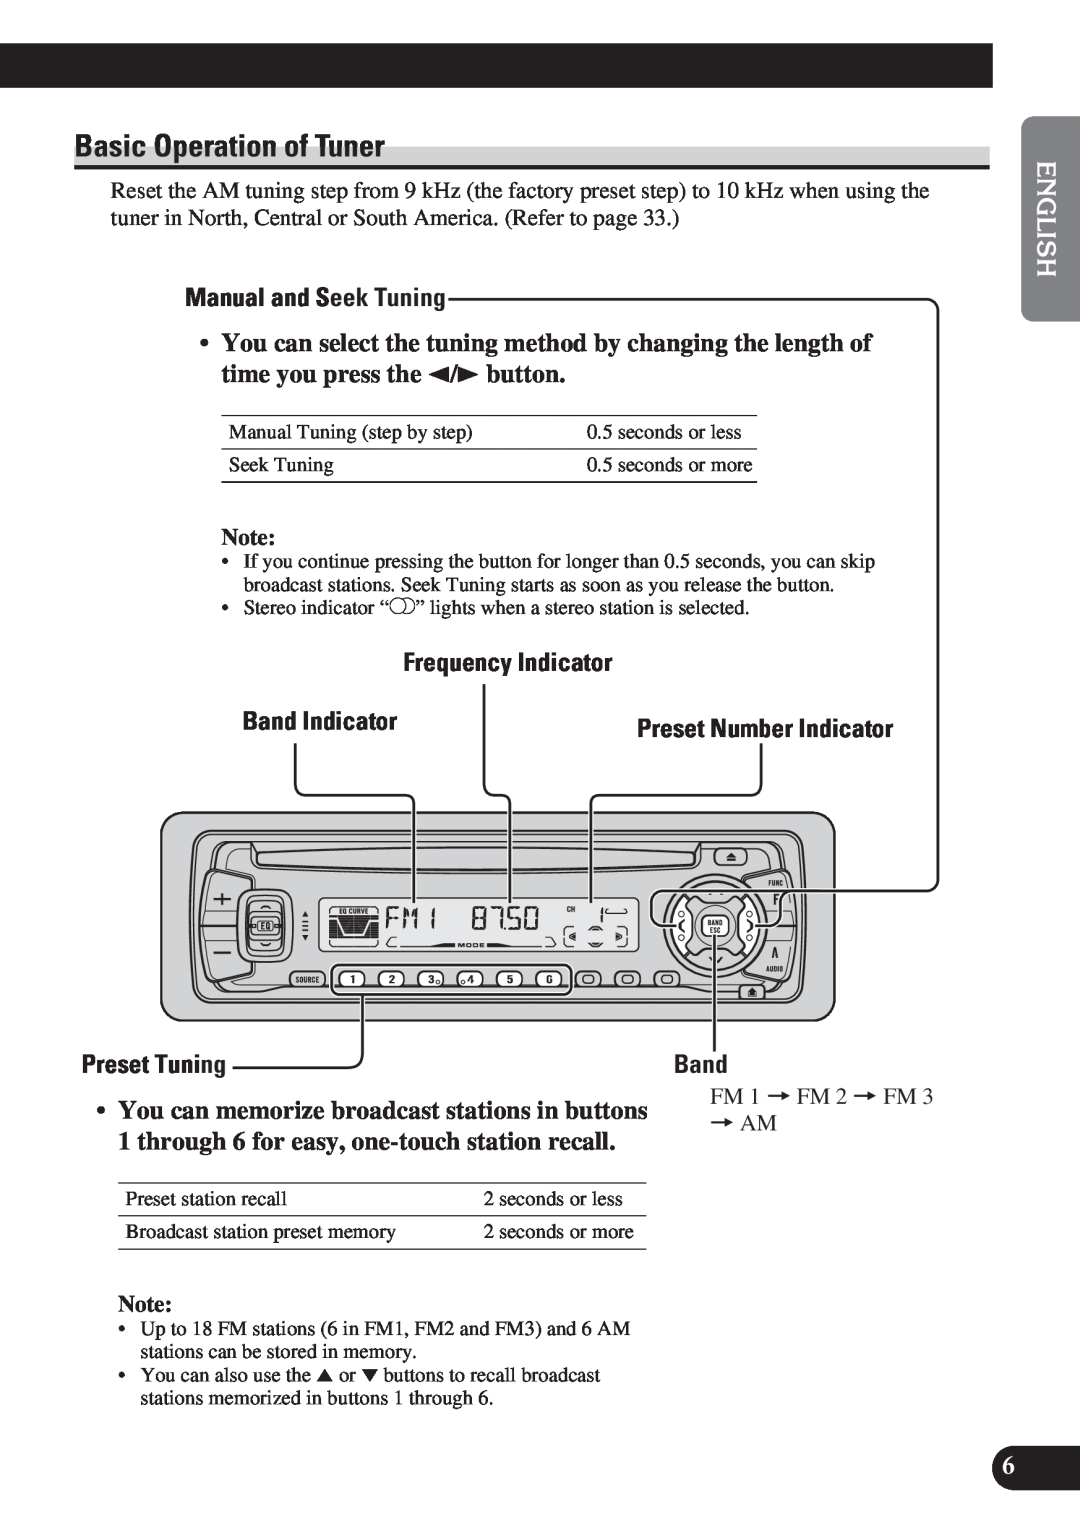 Pioneer DEH-P3150 Basic Operation of Tuner, Manual and Seek Tuning, Frequency Indicator, Band Indicator, Preset Tuni 